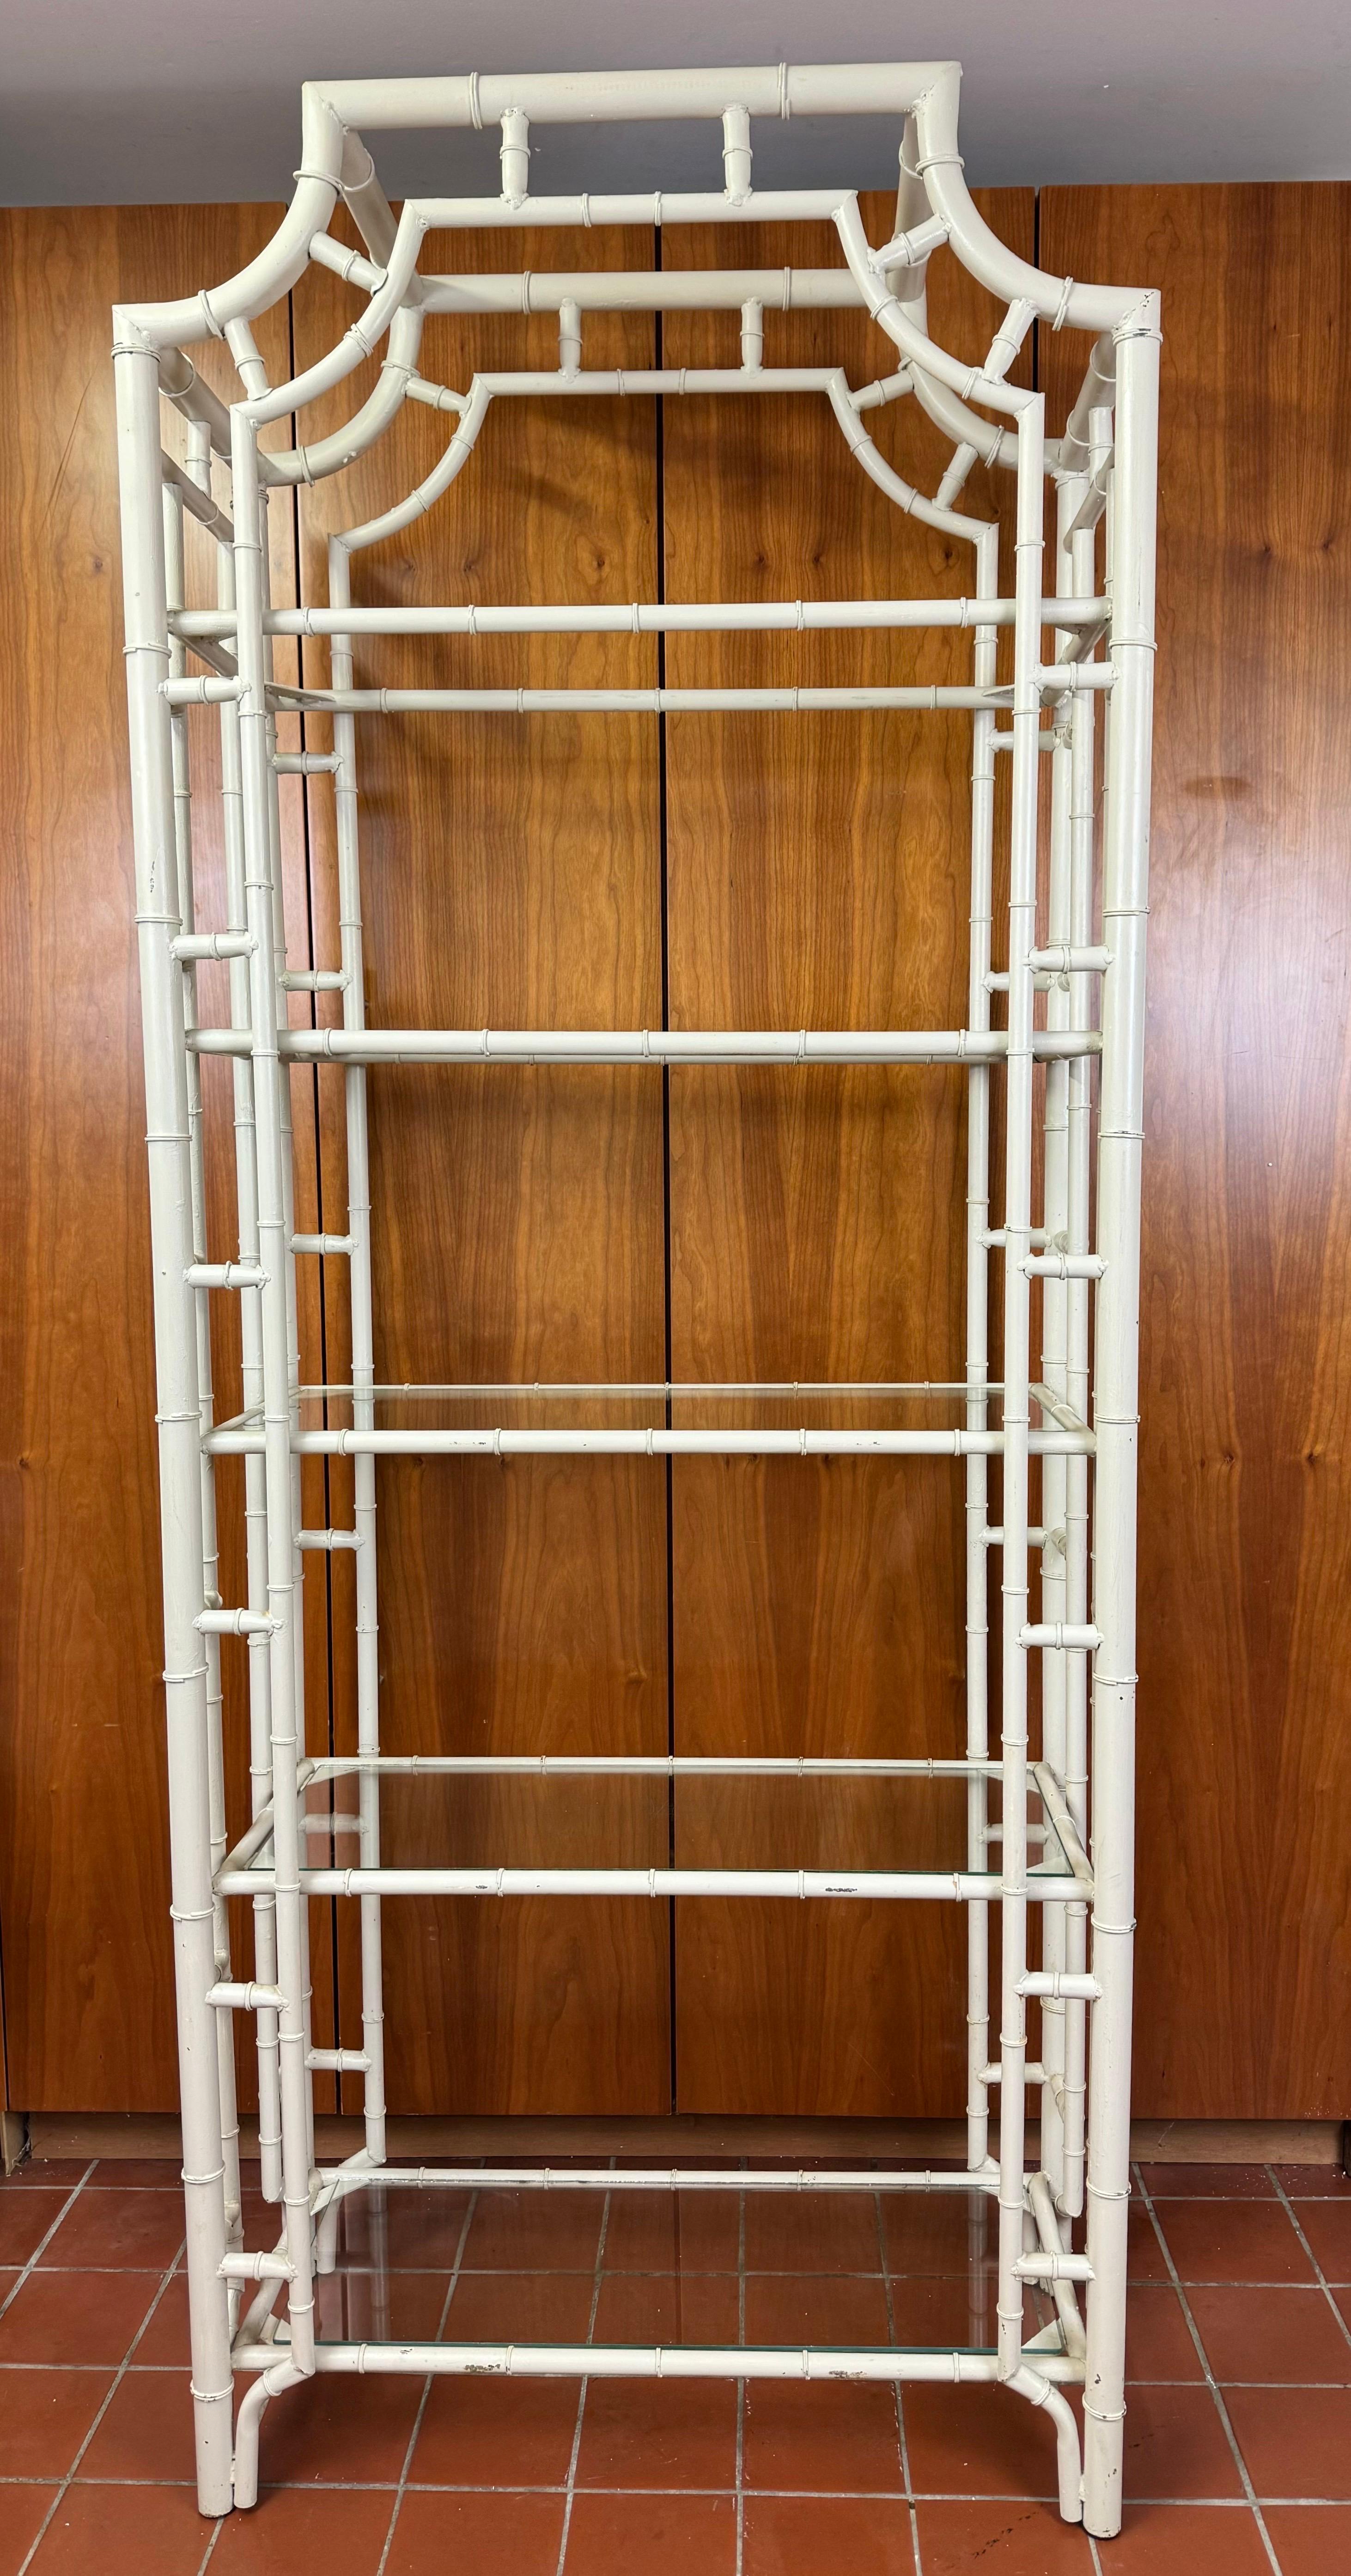 Palm Beach Regency Faux Bamboo Pagoda Etagere. Classic coastal design for that beachside home. Plenty of storage room in this beauty . It has 5 shelves total. Currently in an off white color. Use as is or respray with a high gloss if your